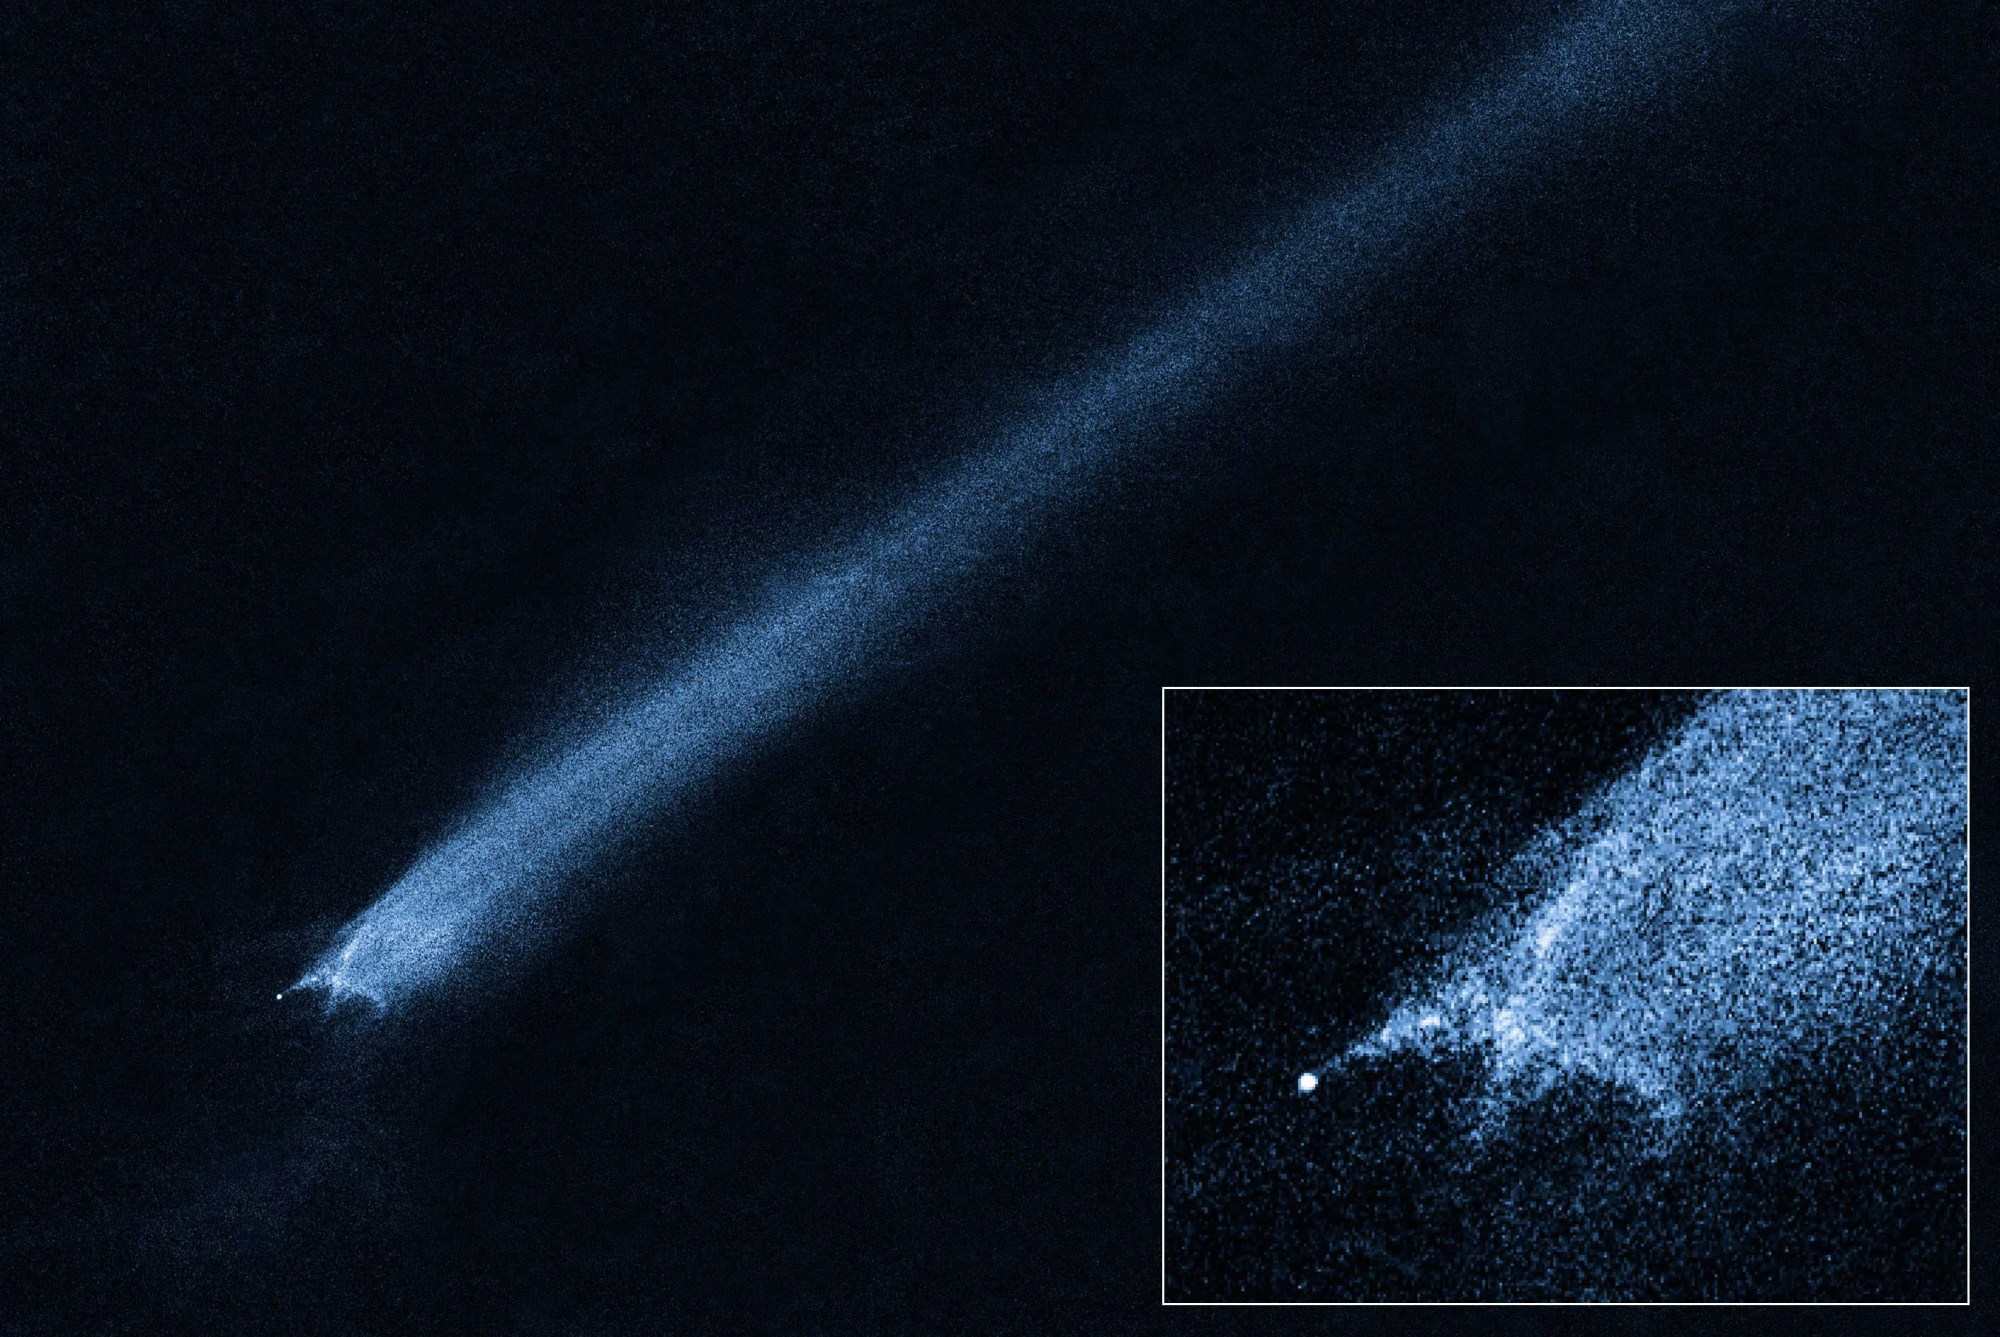 Hubble observations of possible asteroid collision remnants